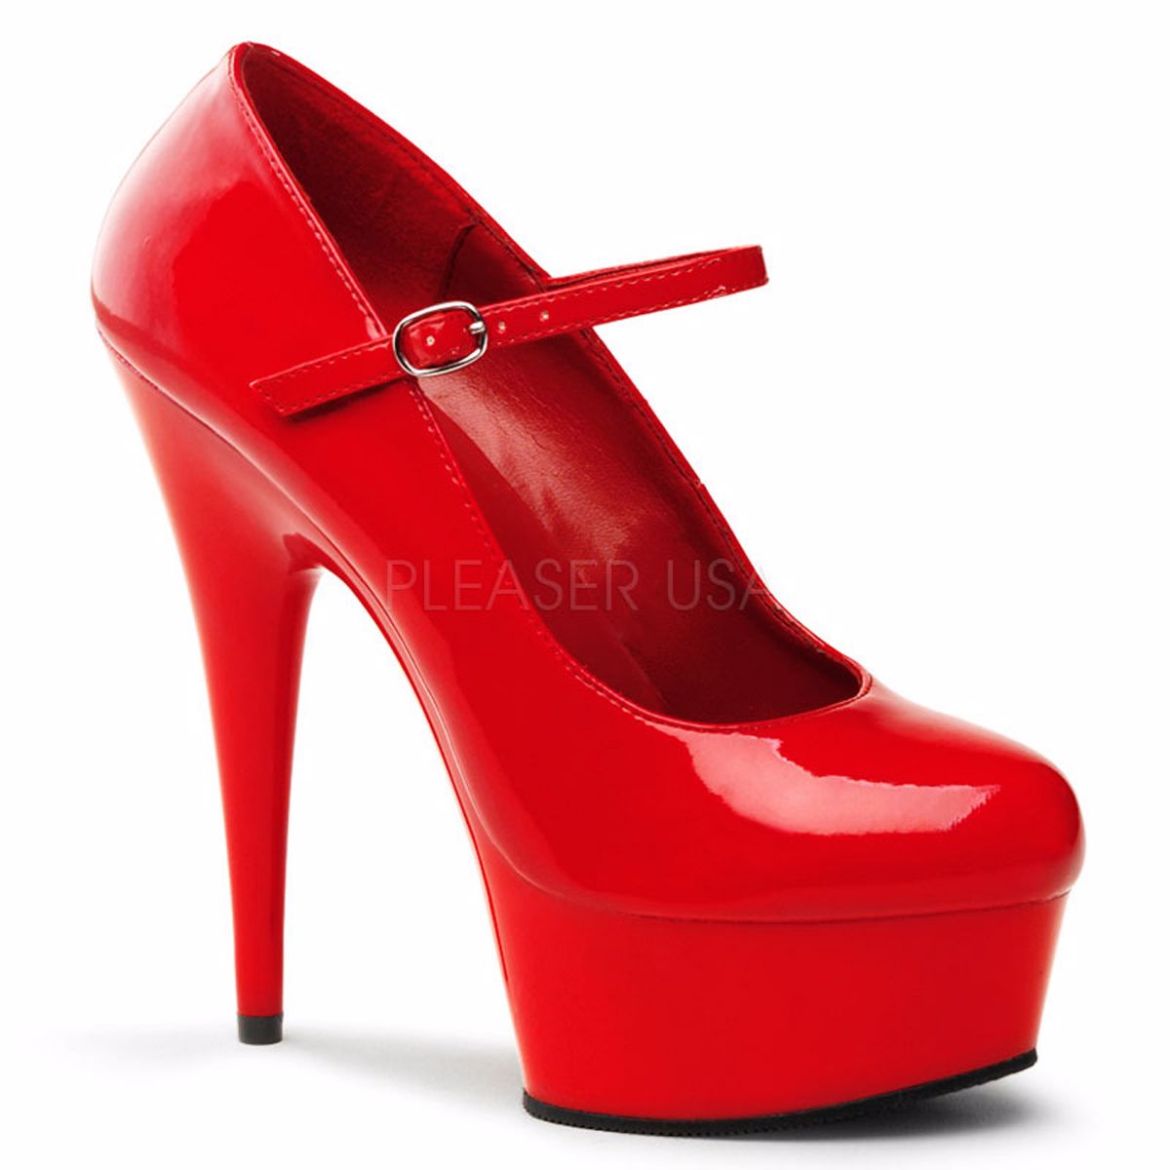 Product image of Pleaser Delight-687 Red/Red, 6 inch (15.2 cm) Heel, 1 3/4 inch (4.4 cm) Platform Court Pump Shoes